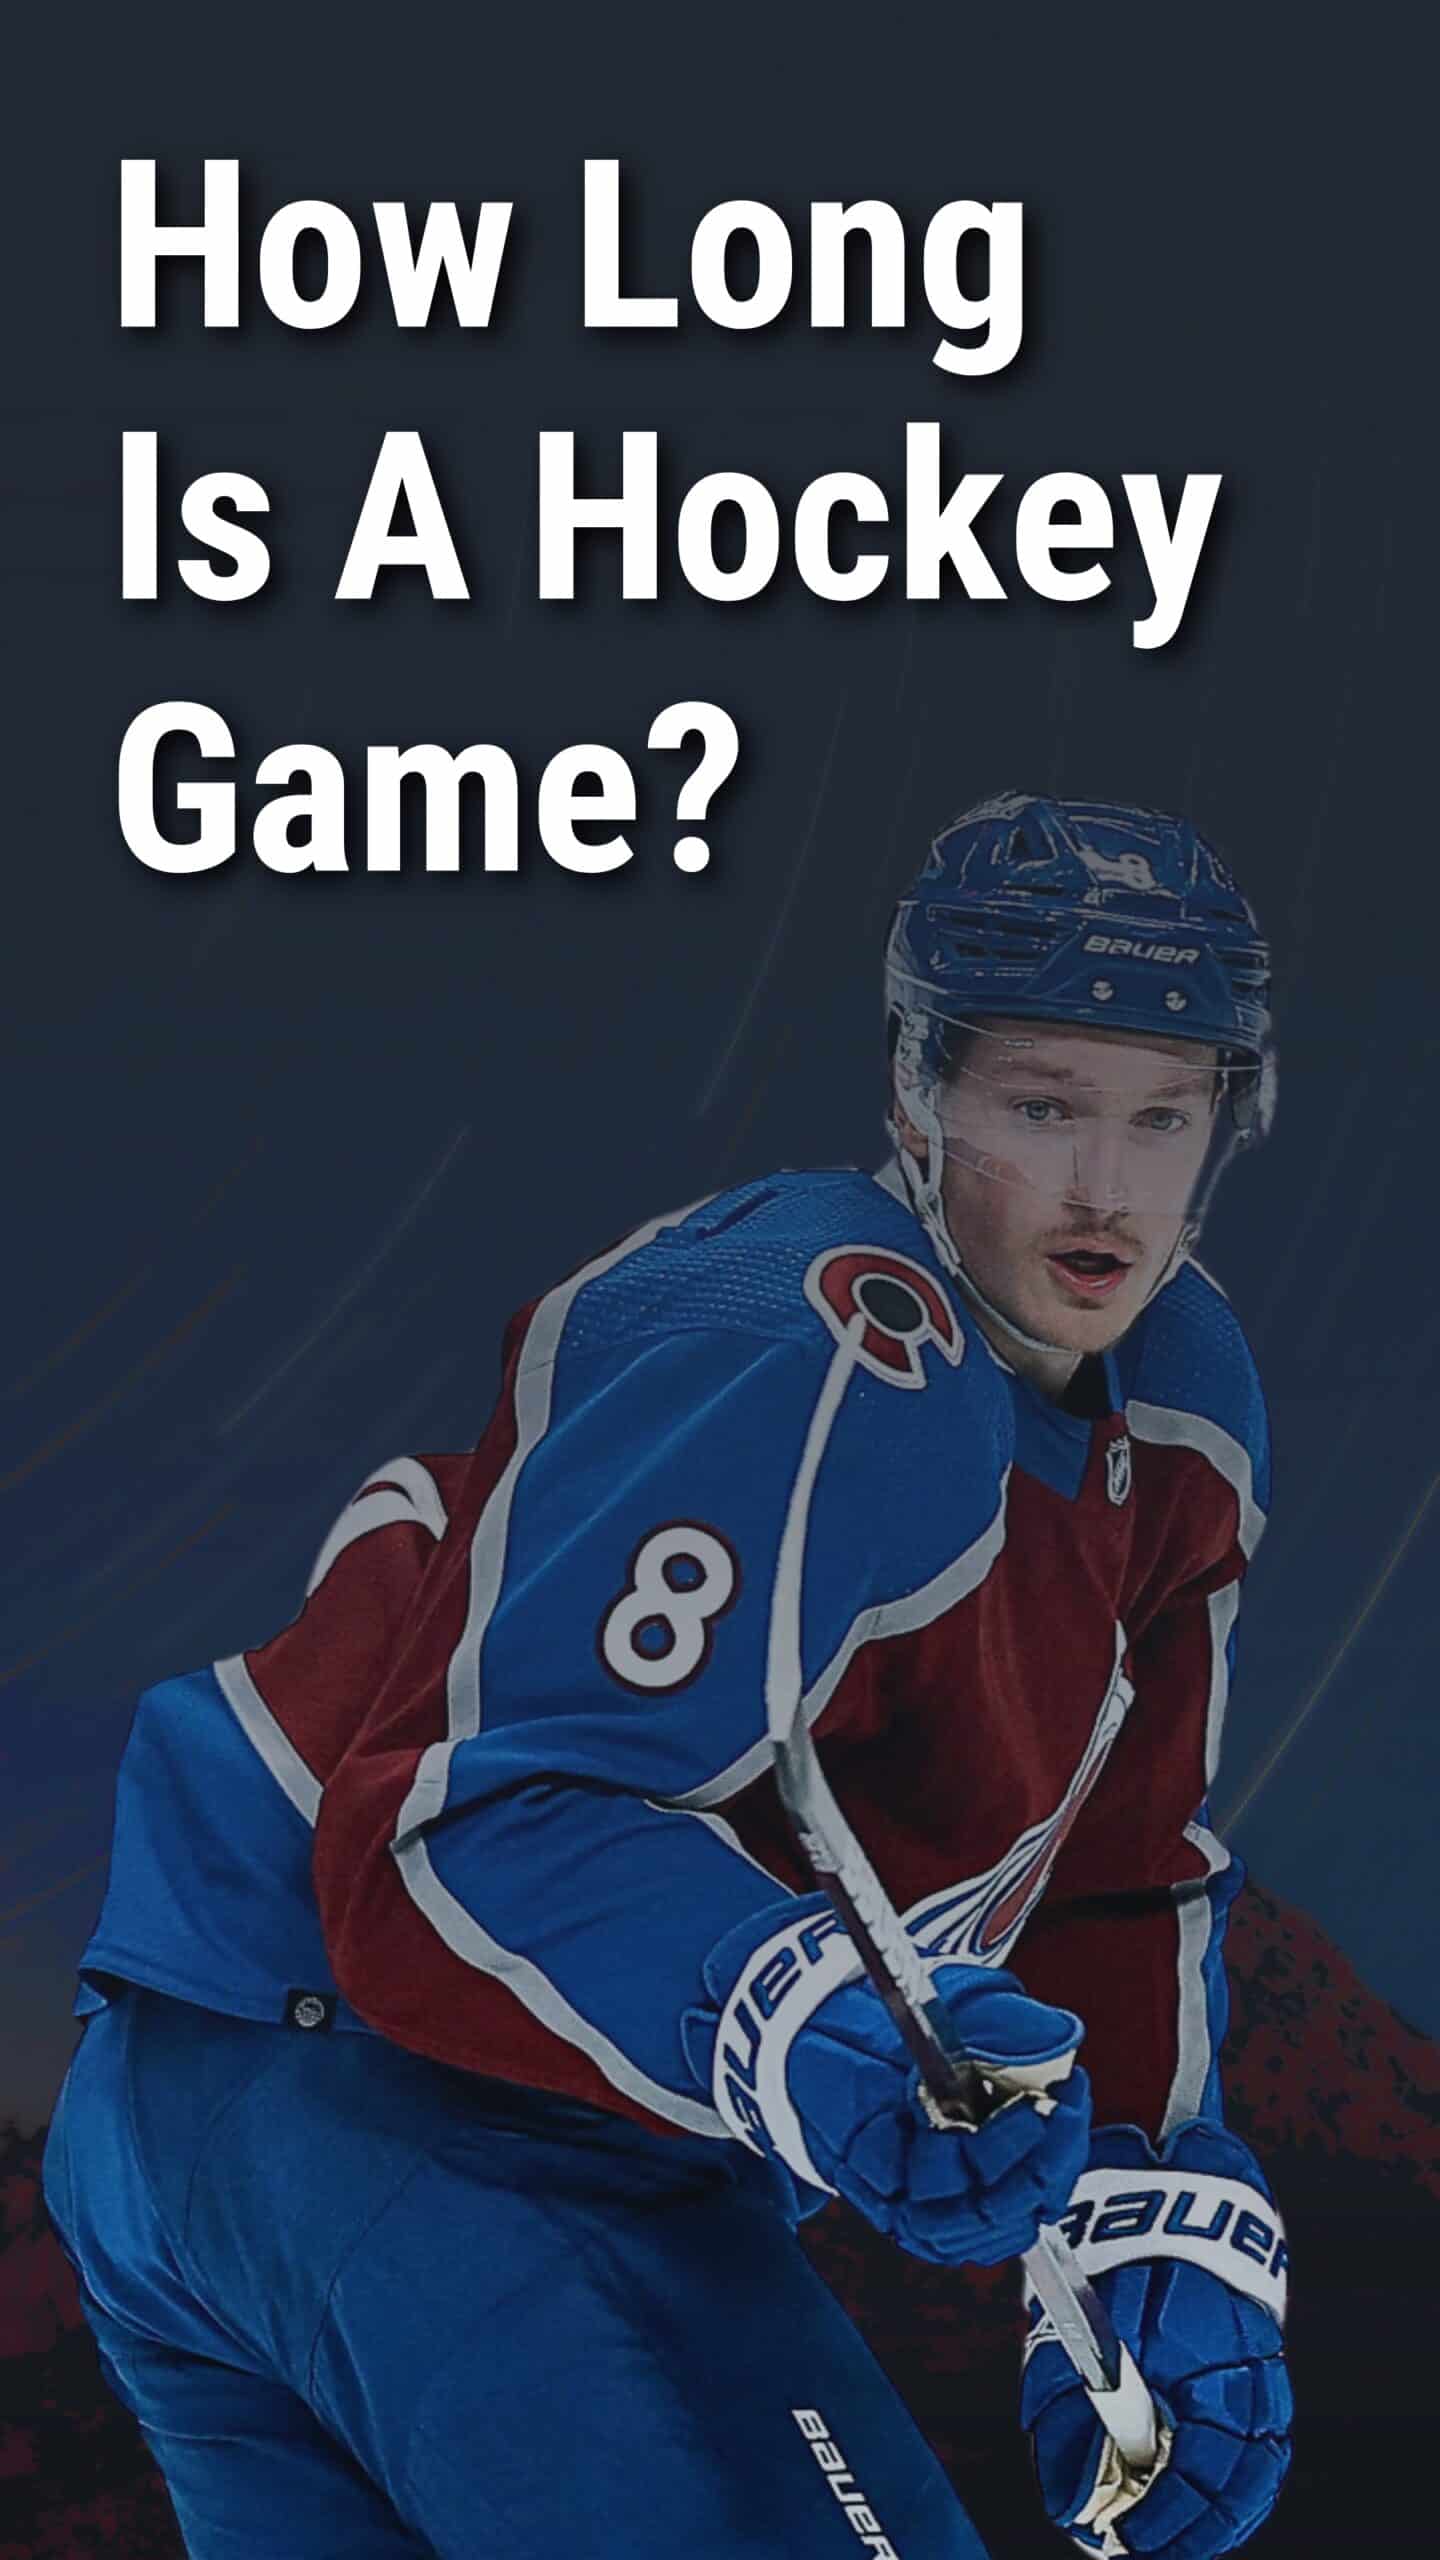 How Long Is A Hockey Game?